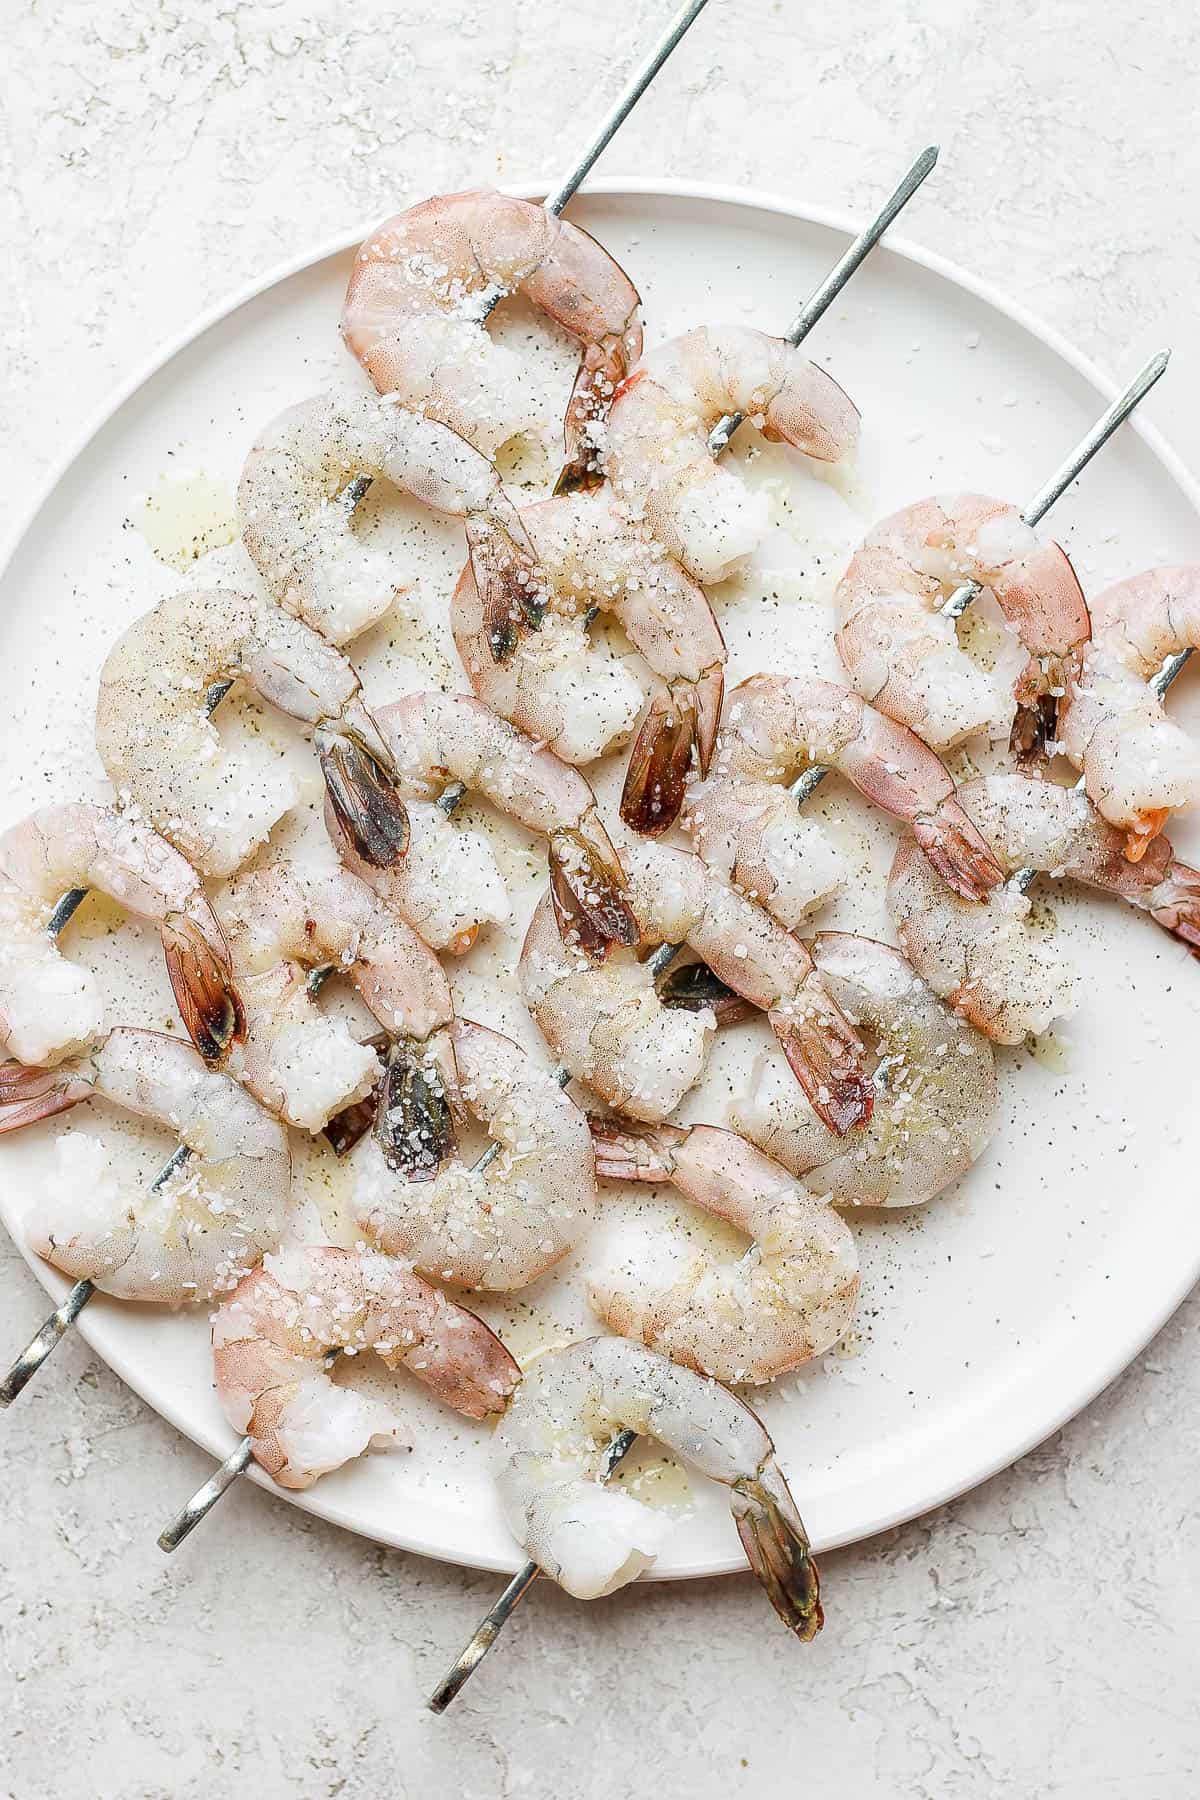 Shrimp on skewers that were brushed with olive oil and sprinkled with salt and pepper.